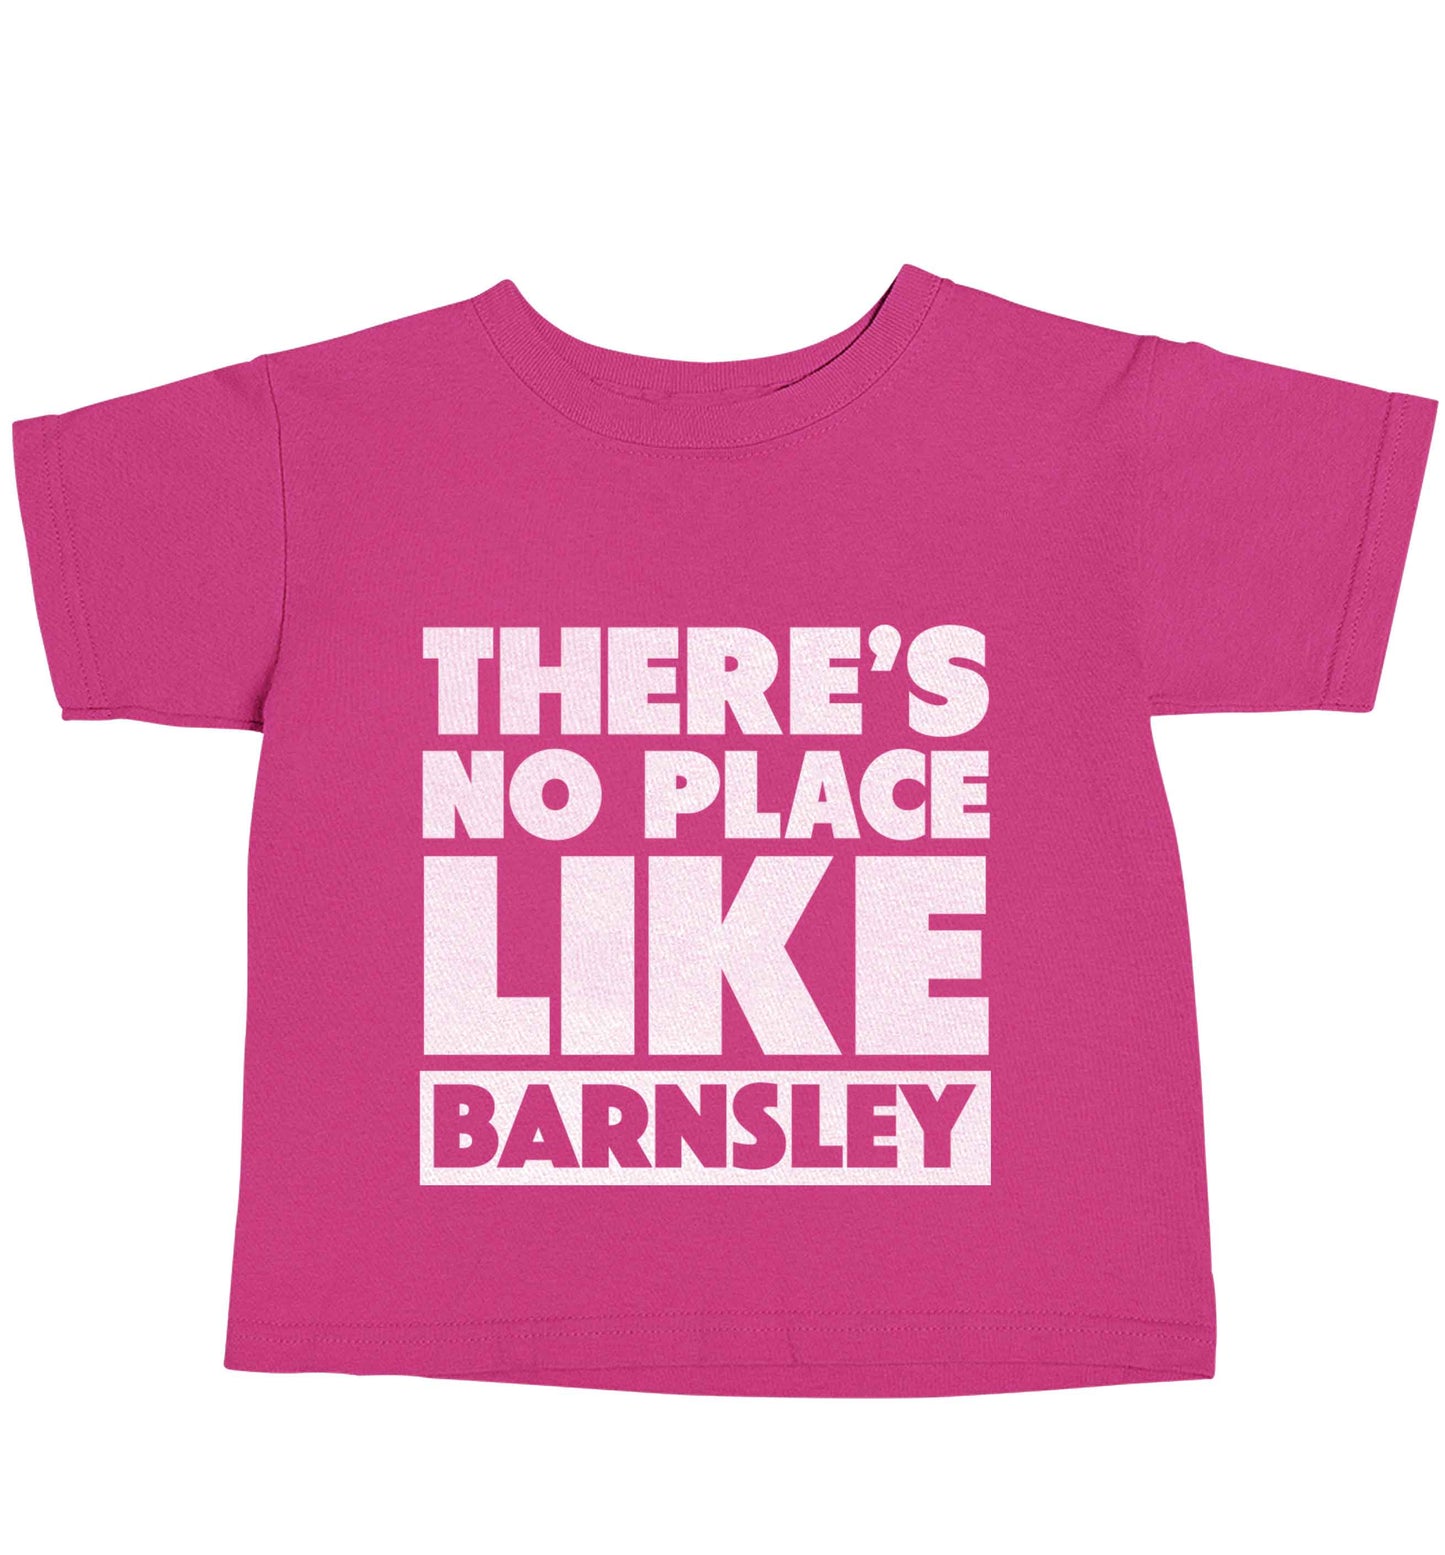 There's No Place Like Barnsley pink baby toddler Tshirt 2 Years